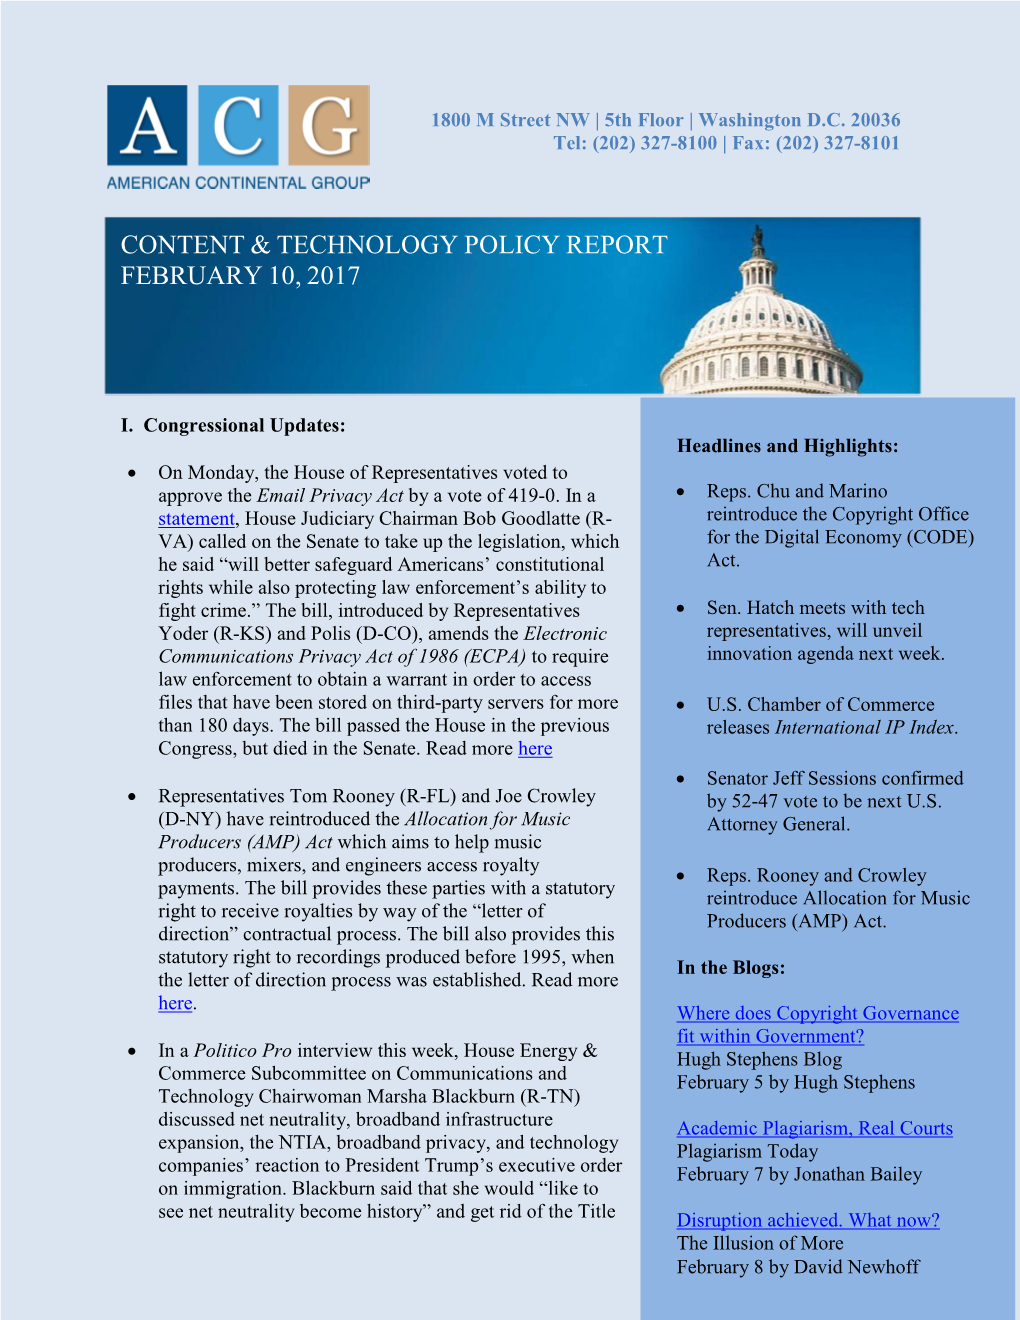 Content & Technology Policy Report February 10, 2017